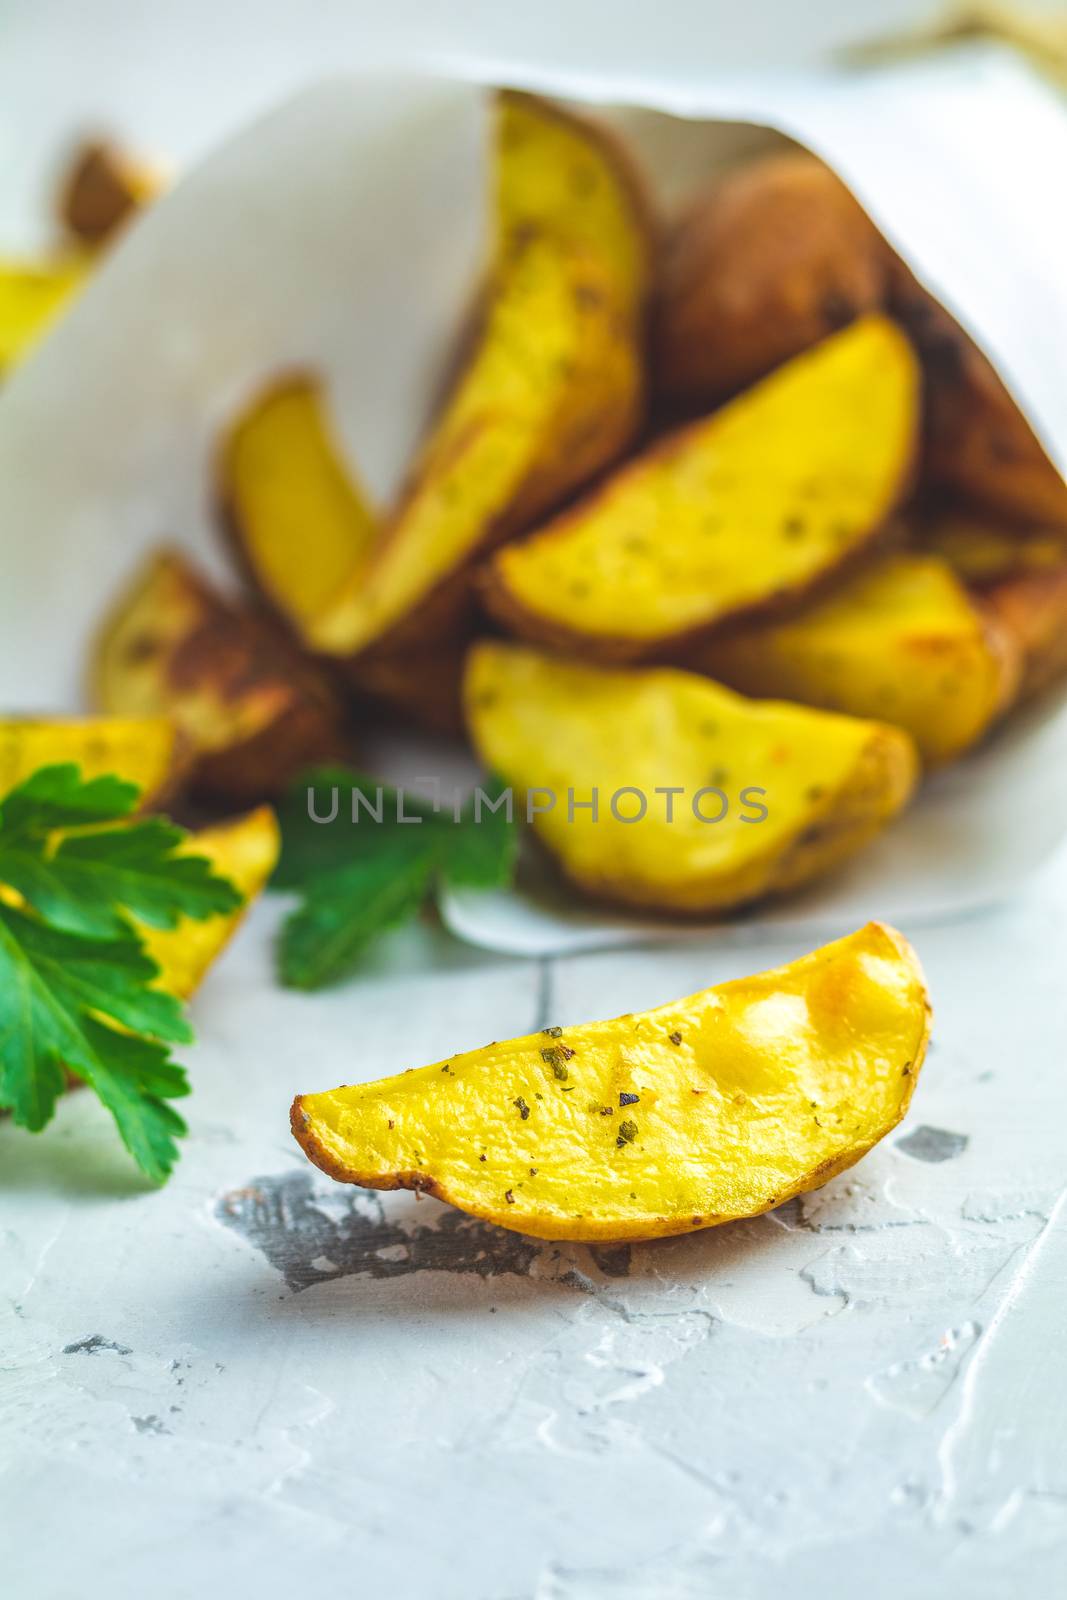 Baked potato wedges on paper on gray background by ArtSvitlyna